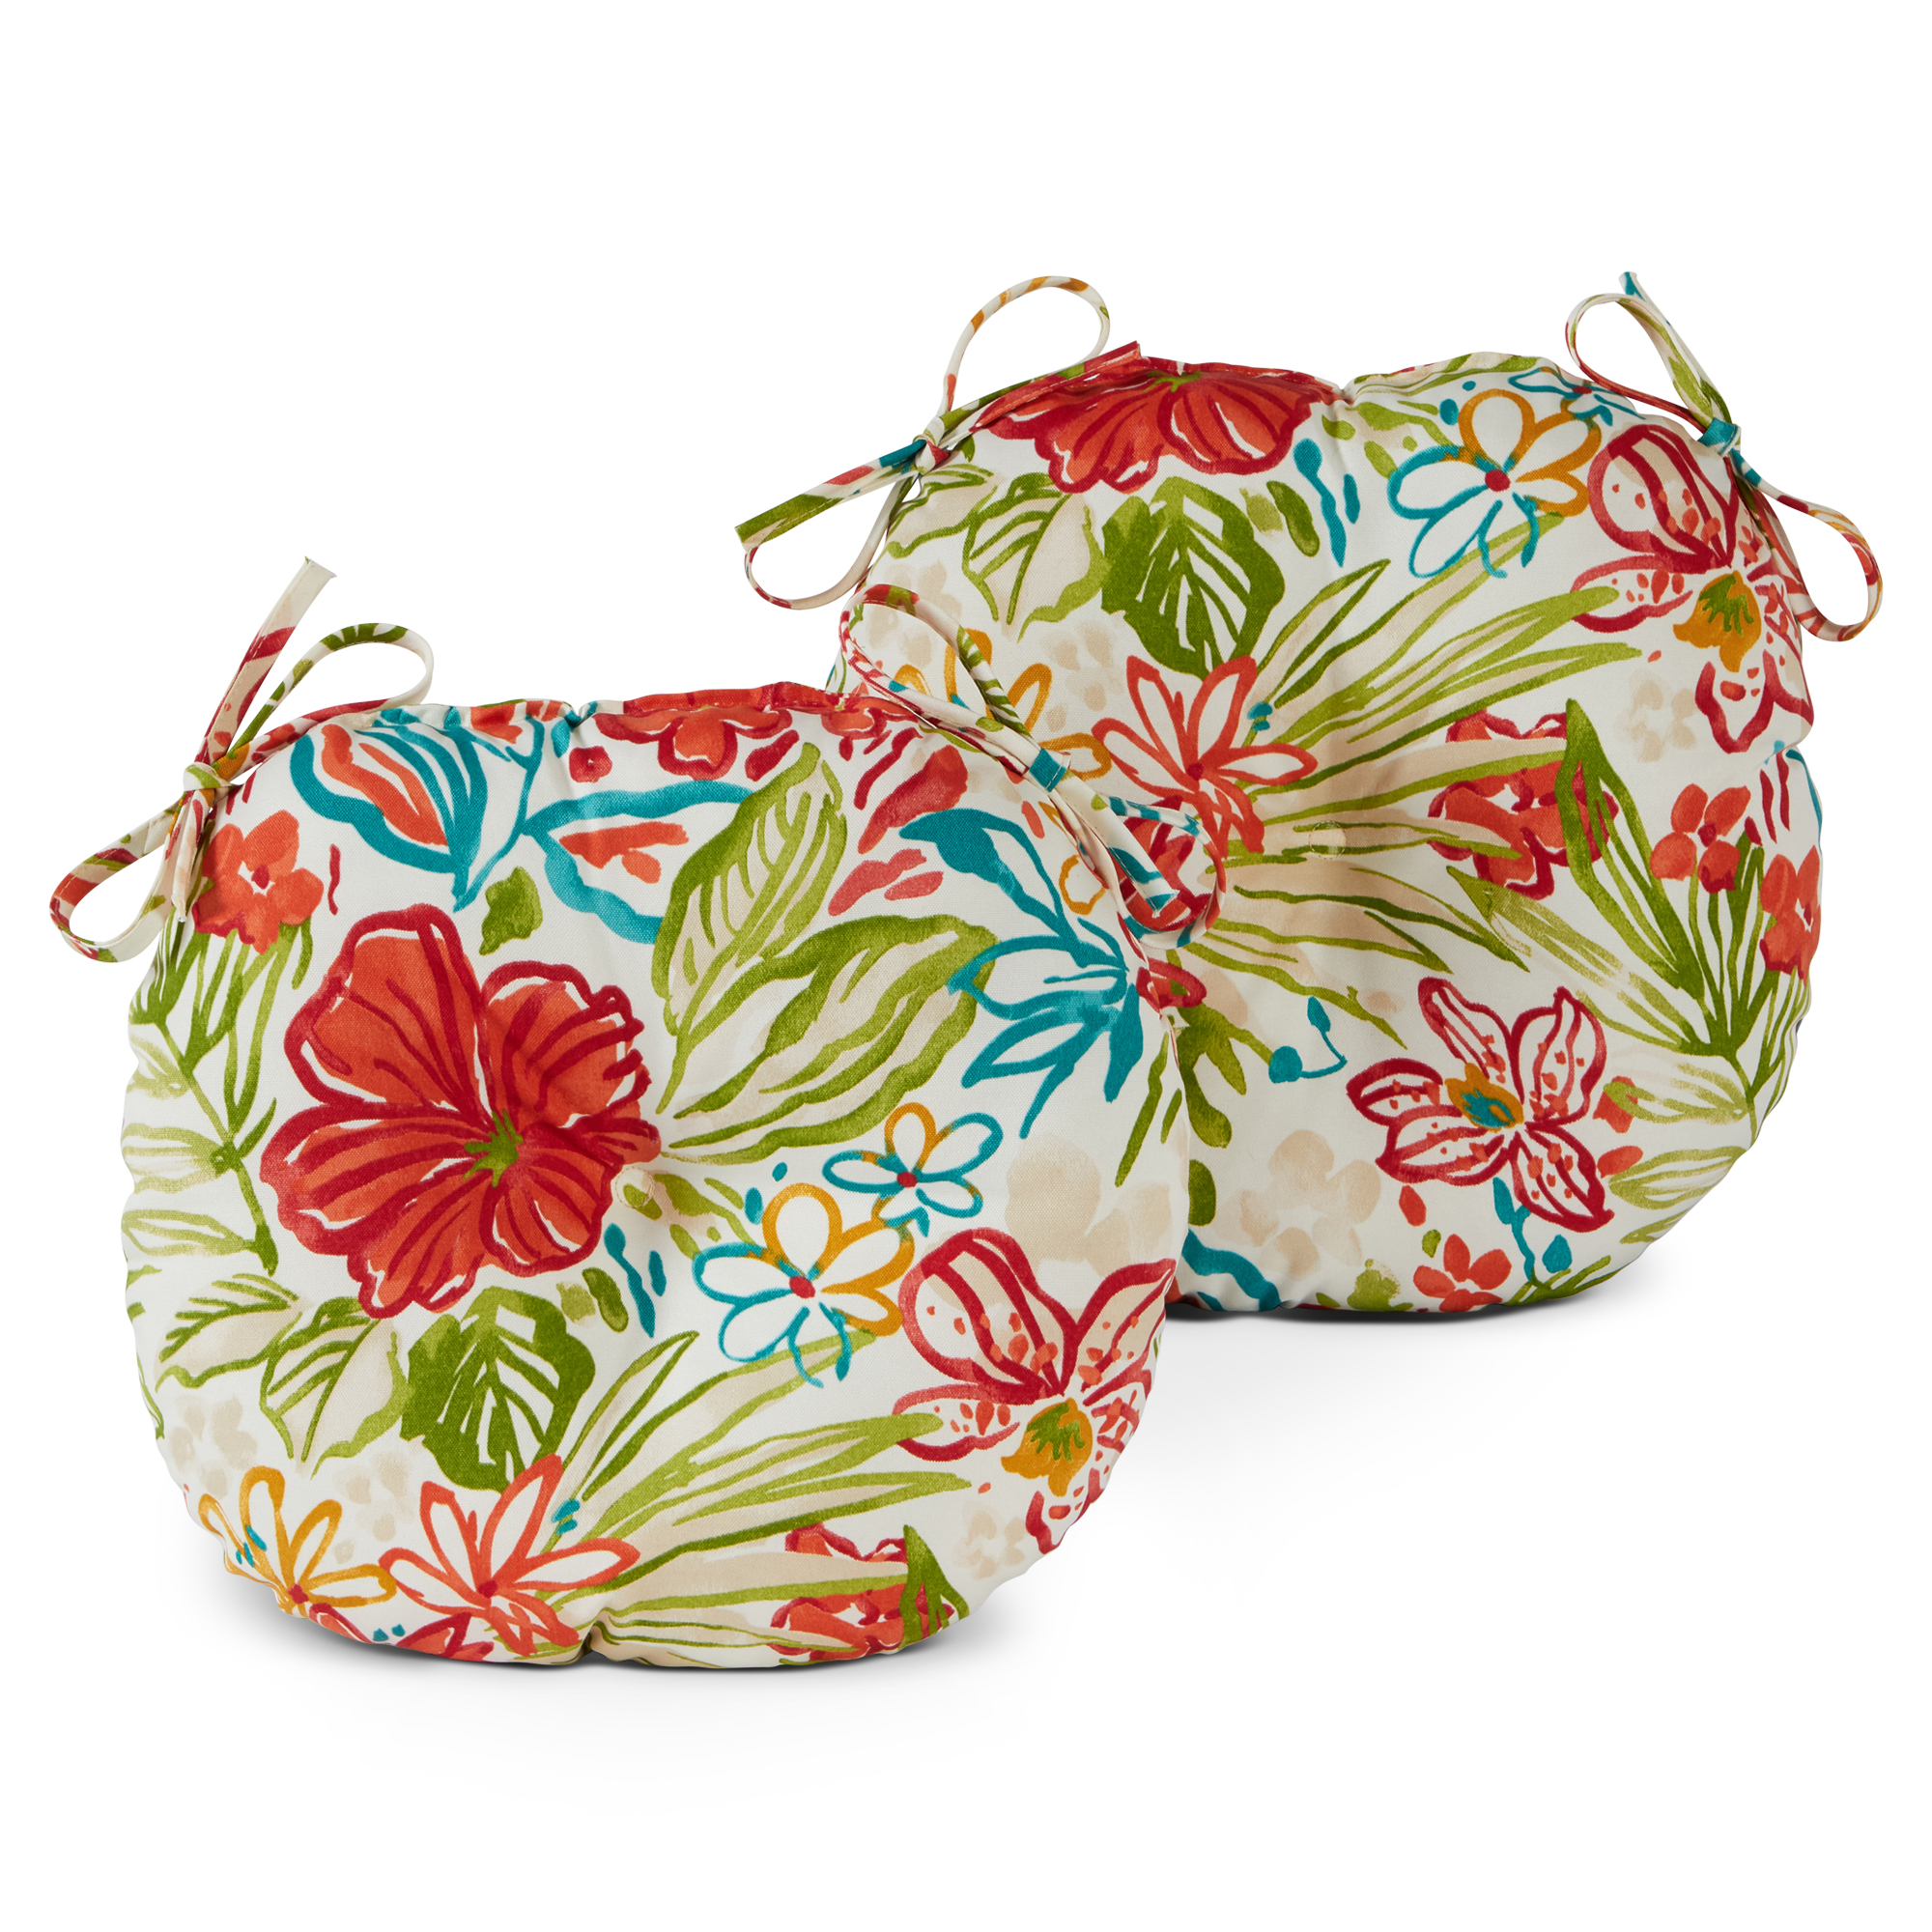 Greendale Home Fashions Breeze Floral 15 in. Round Outdoor Reversible Bistro Seat Cushion (Set of 2) - image 1 of 7